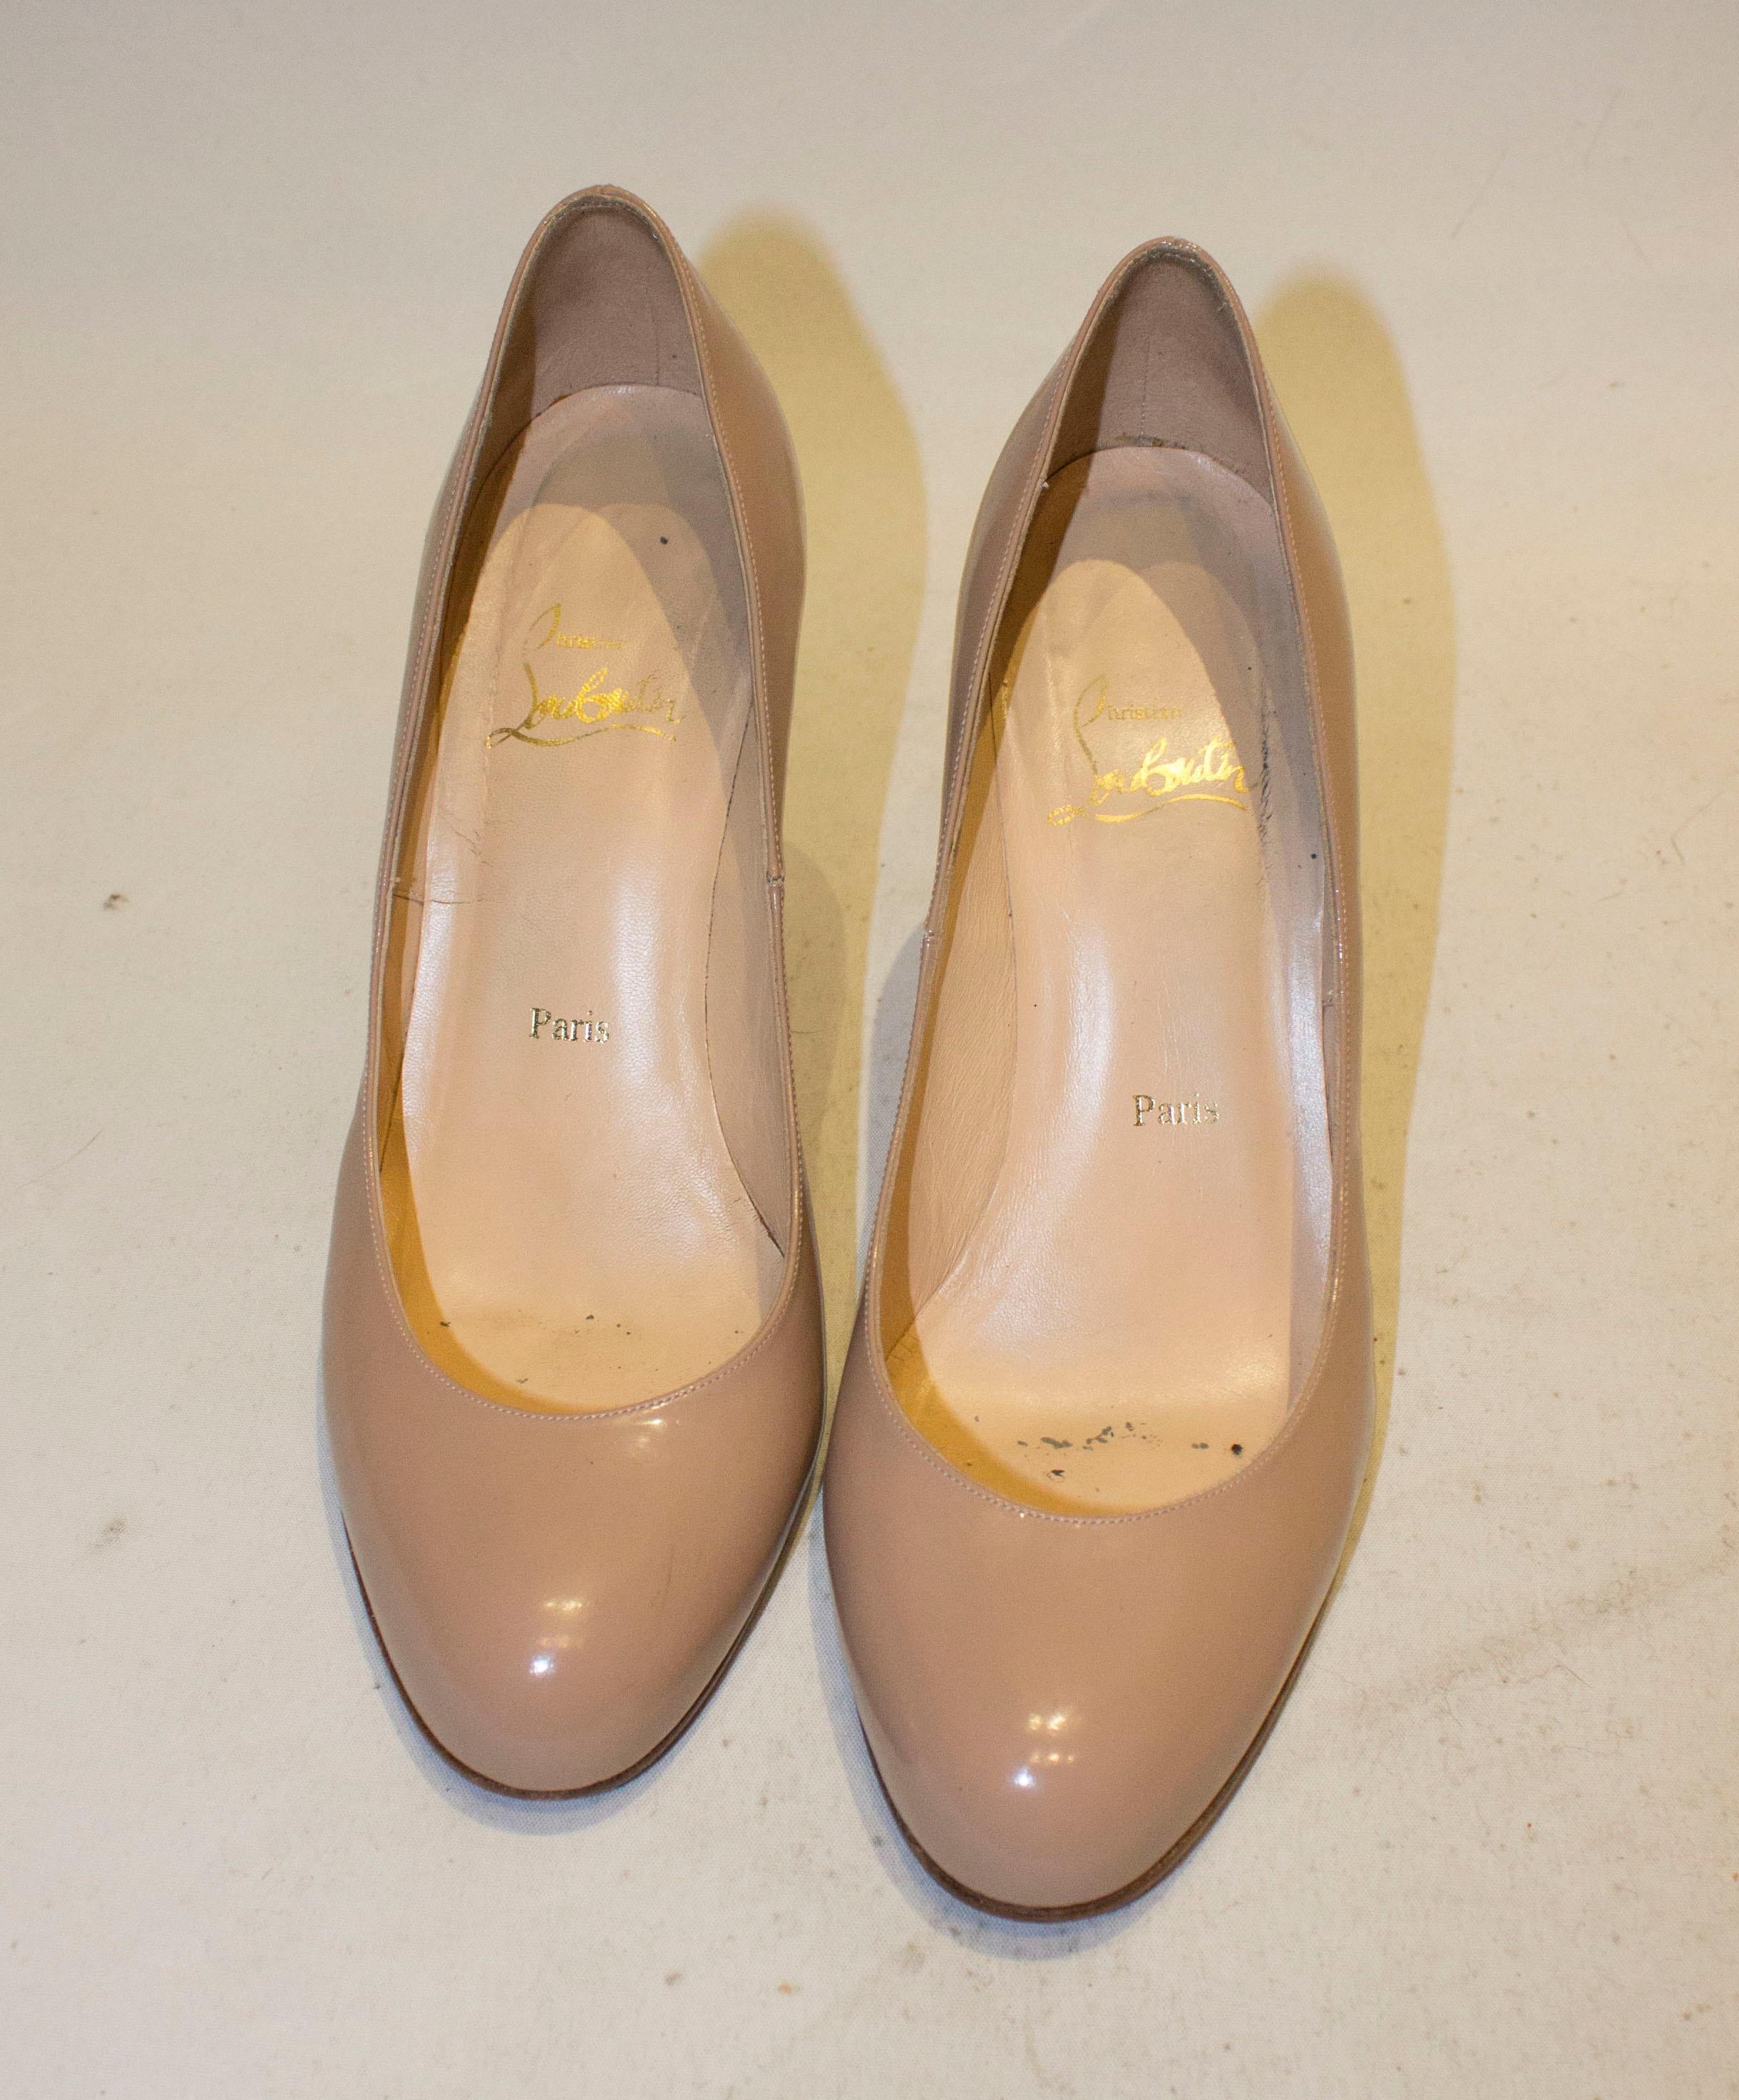 A chic pair of nude patent heels by Christian Louboutin. The nude heels have an almond toe, leather sole and a marked a size 38 1/2 , heel height 3 1/2 ''